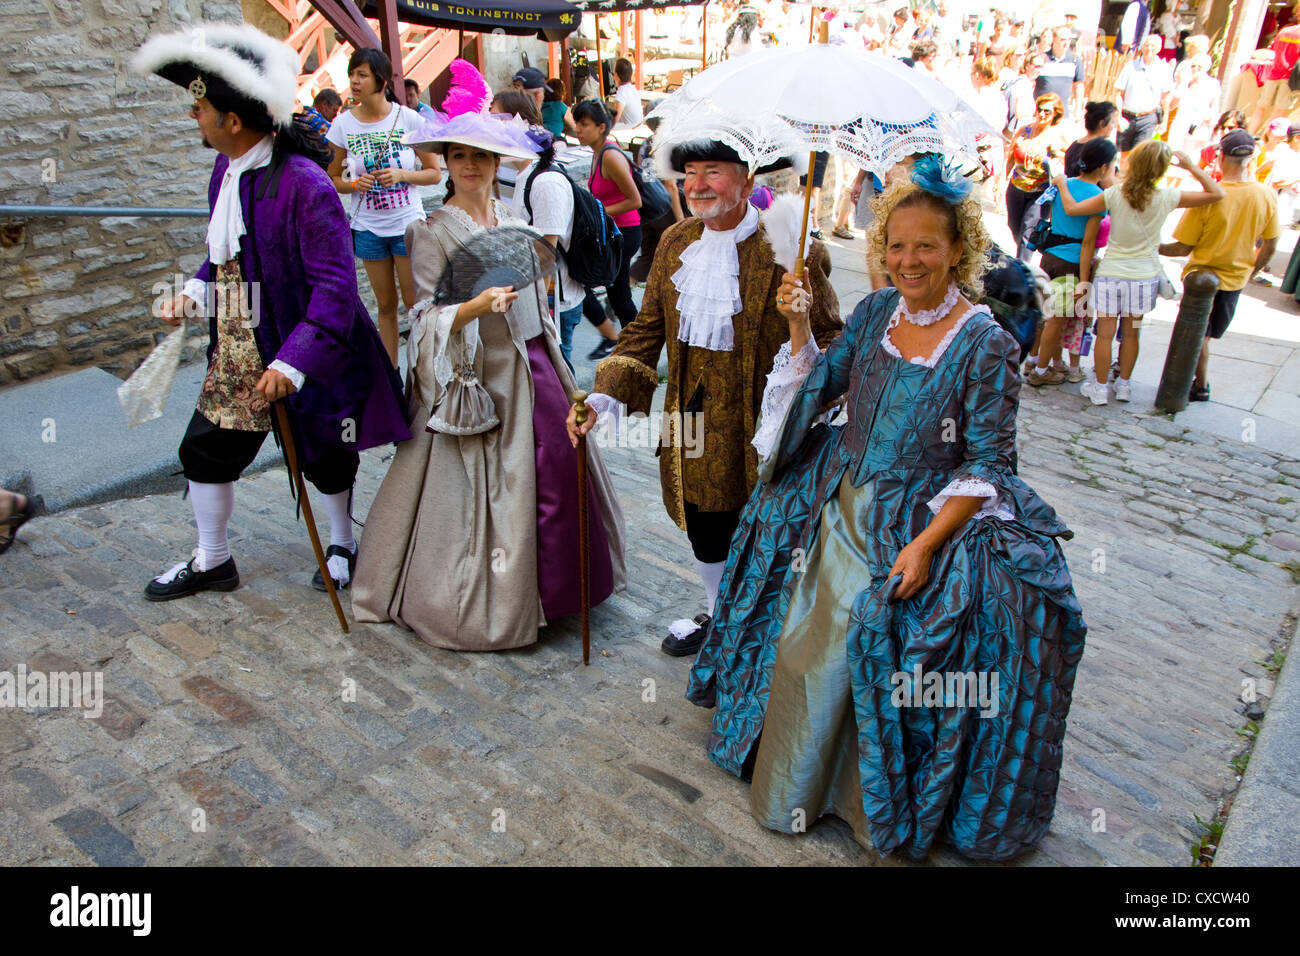 17th century French Canadian costume, New France Festival, Quebec City ...